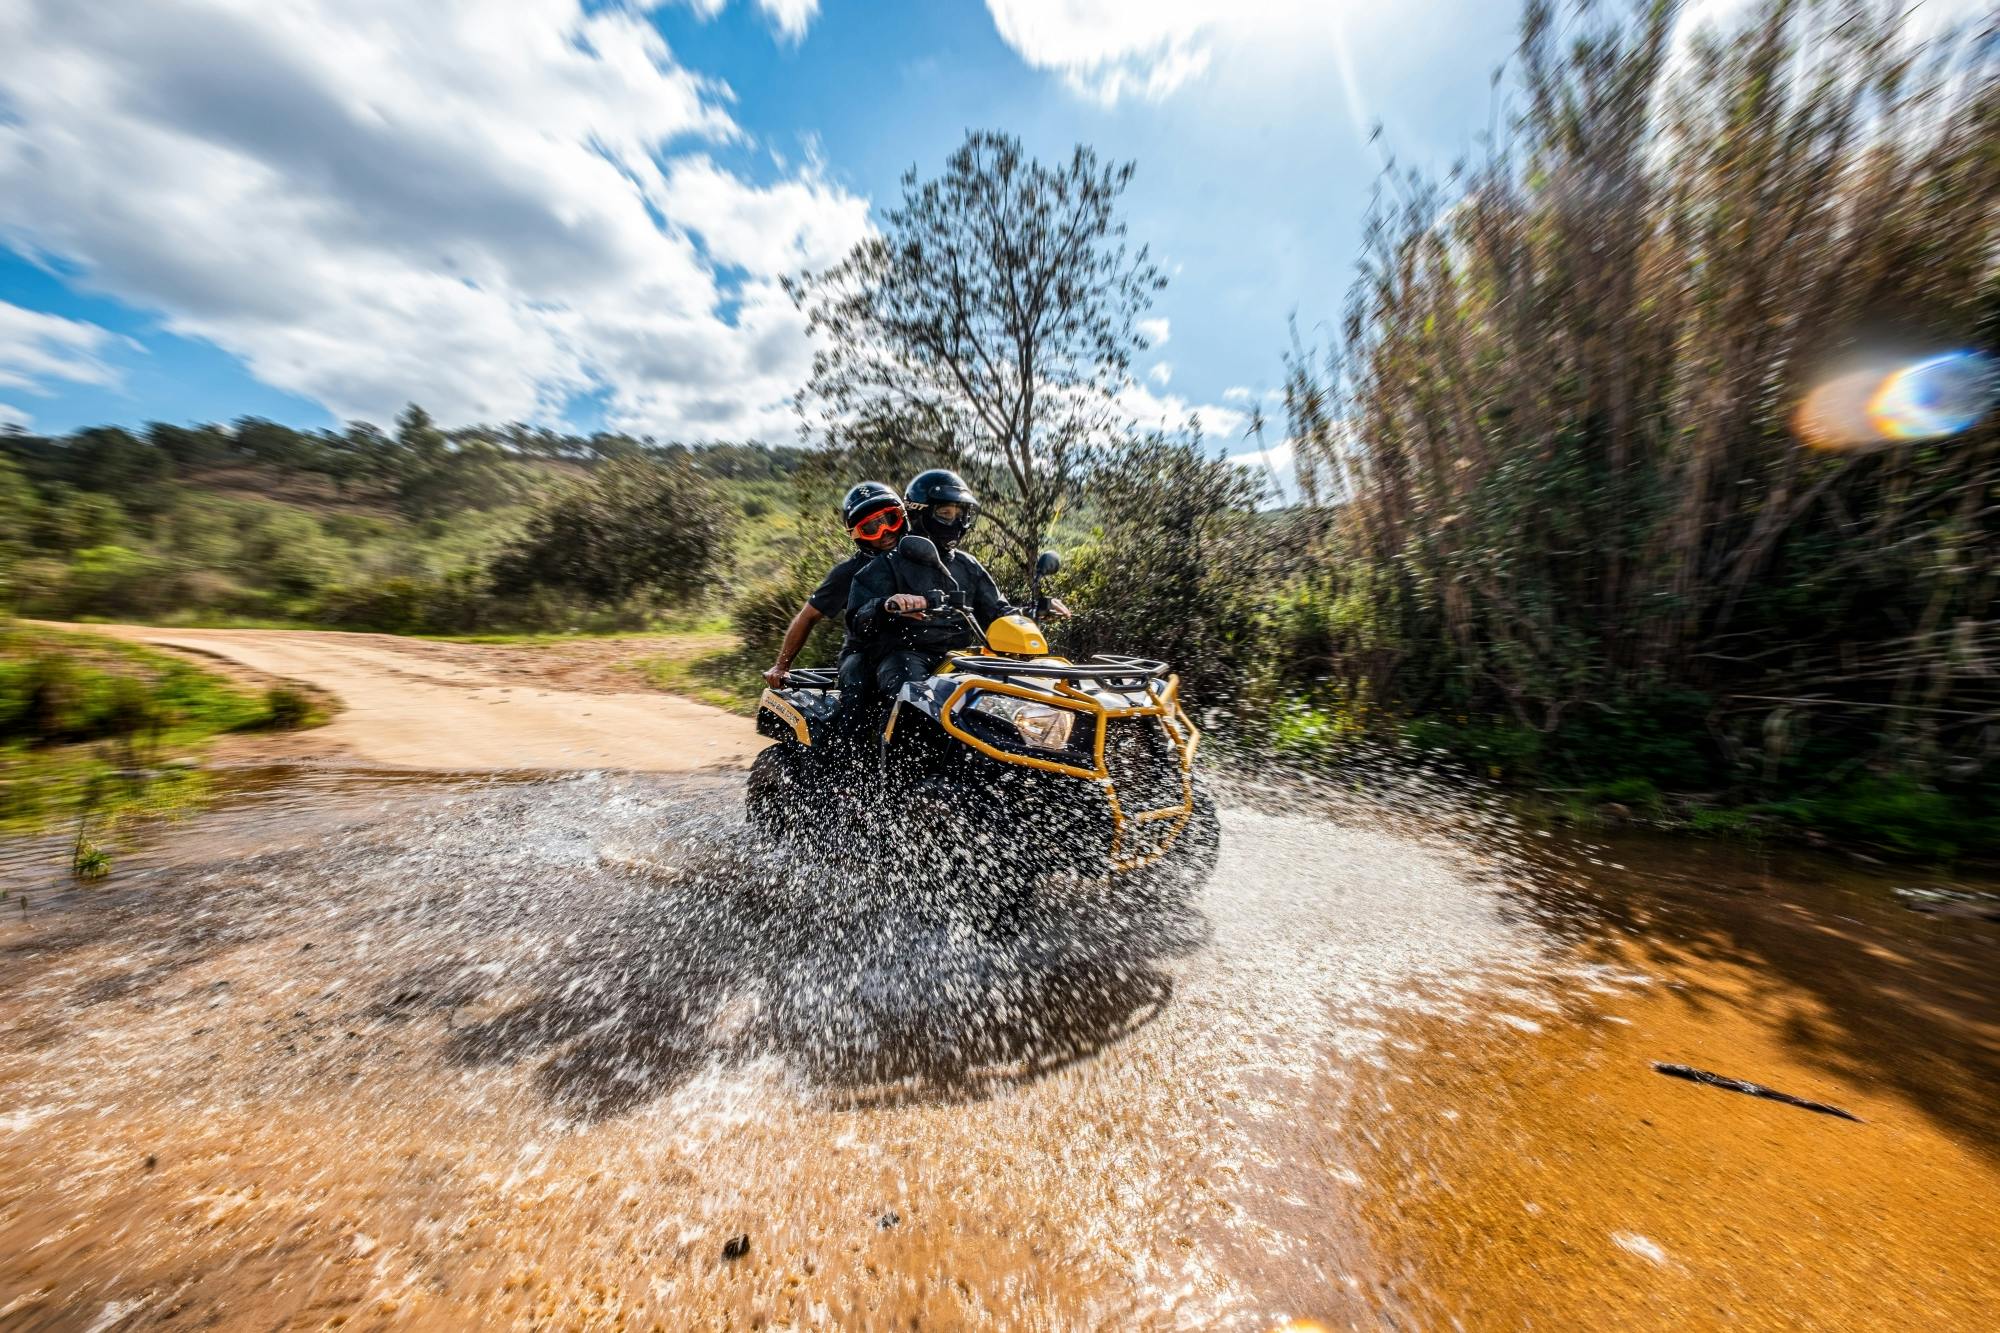 Half day quad tour from Albufeira